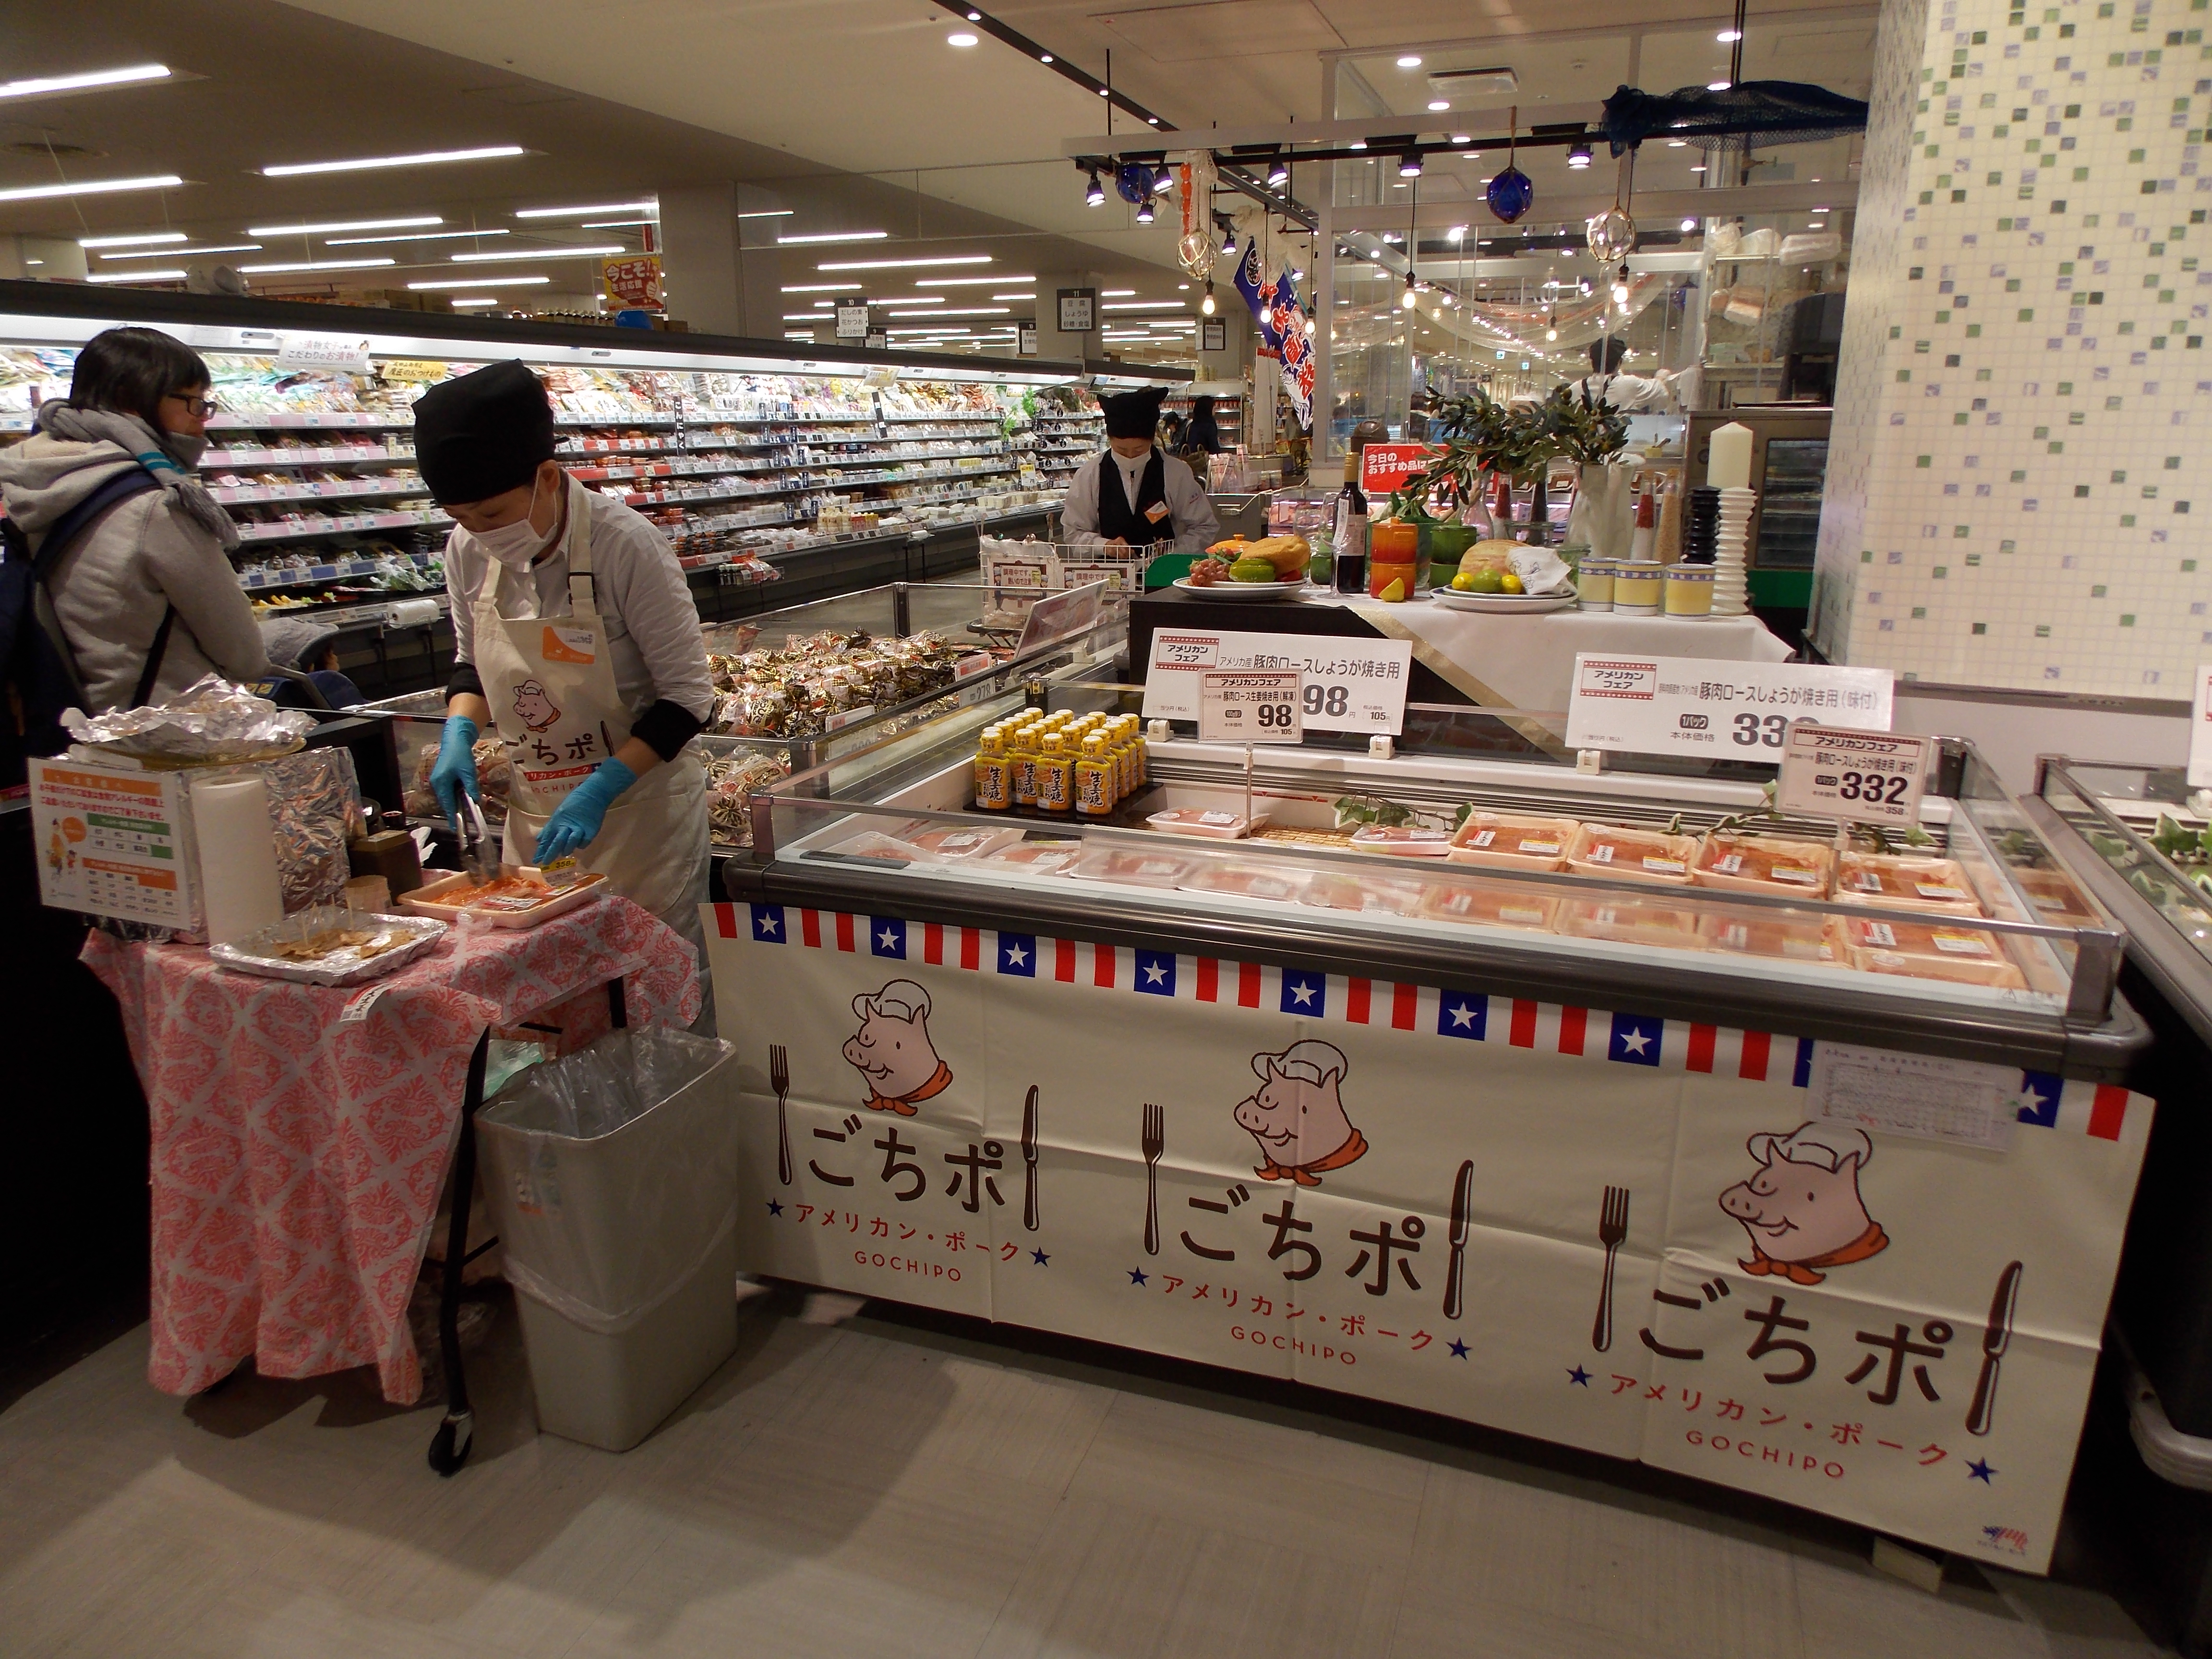 In the Daiei retail store, U.S. Pork is prominently displayed and marketed with the assistance of the U.S. Meat Export Federation.